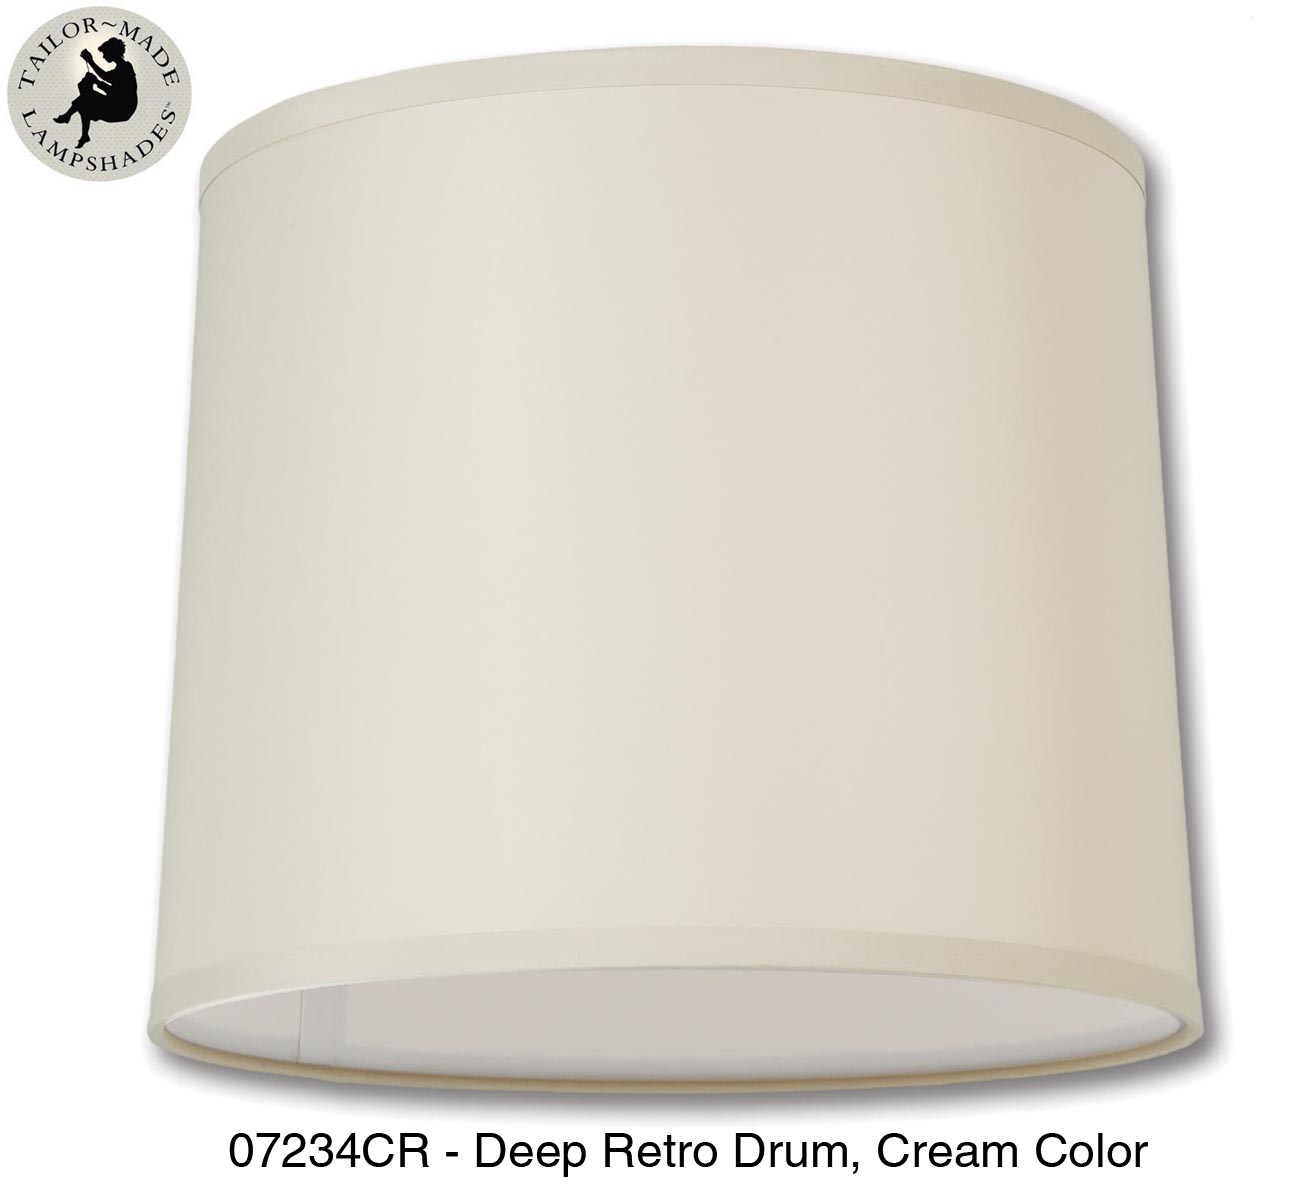 Deep Retro Drum Lamp Shades - Pewter Color, Microfiber Chiffon Material, Nickel Plated Fitters